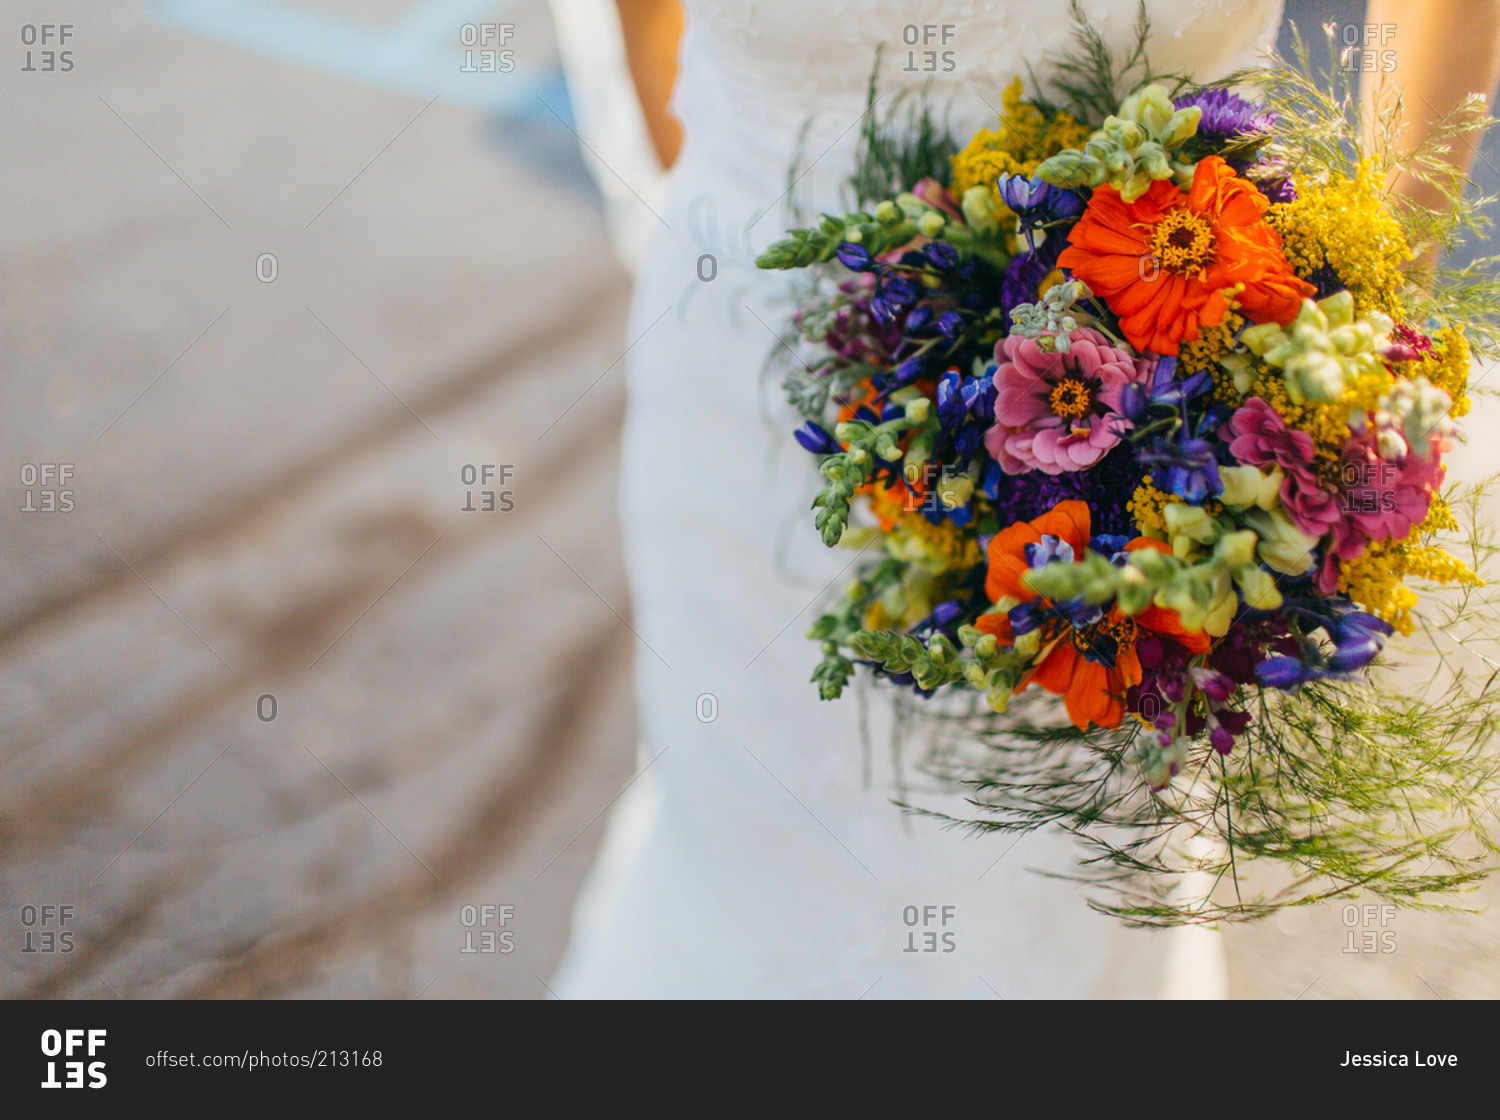 A bride carries a brightly colored bouquet